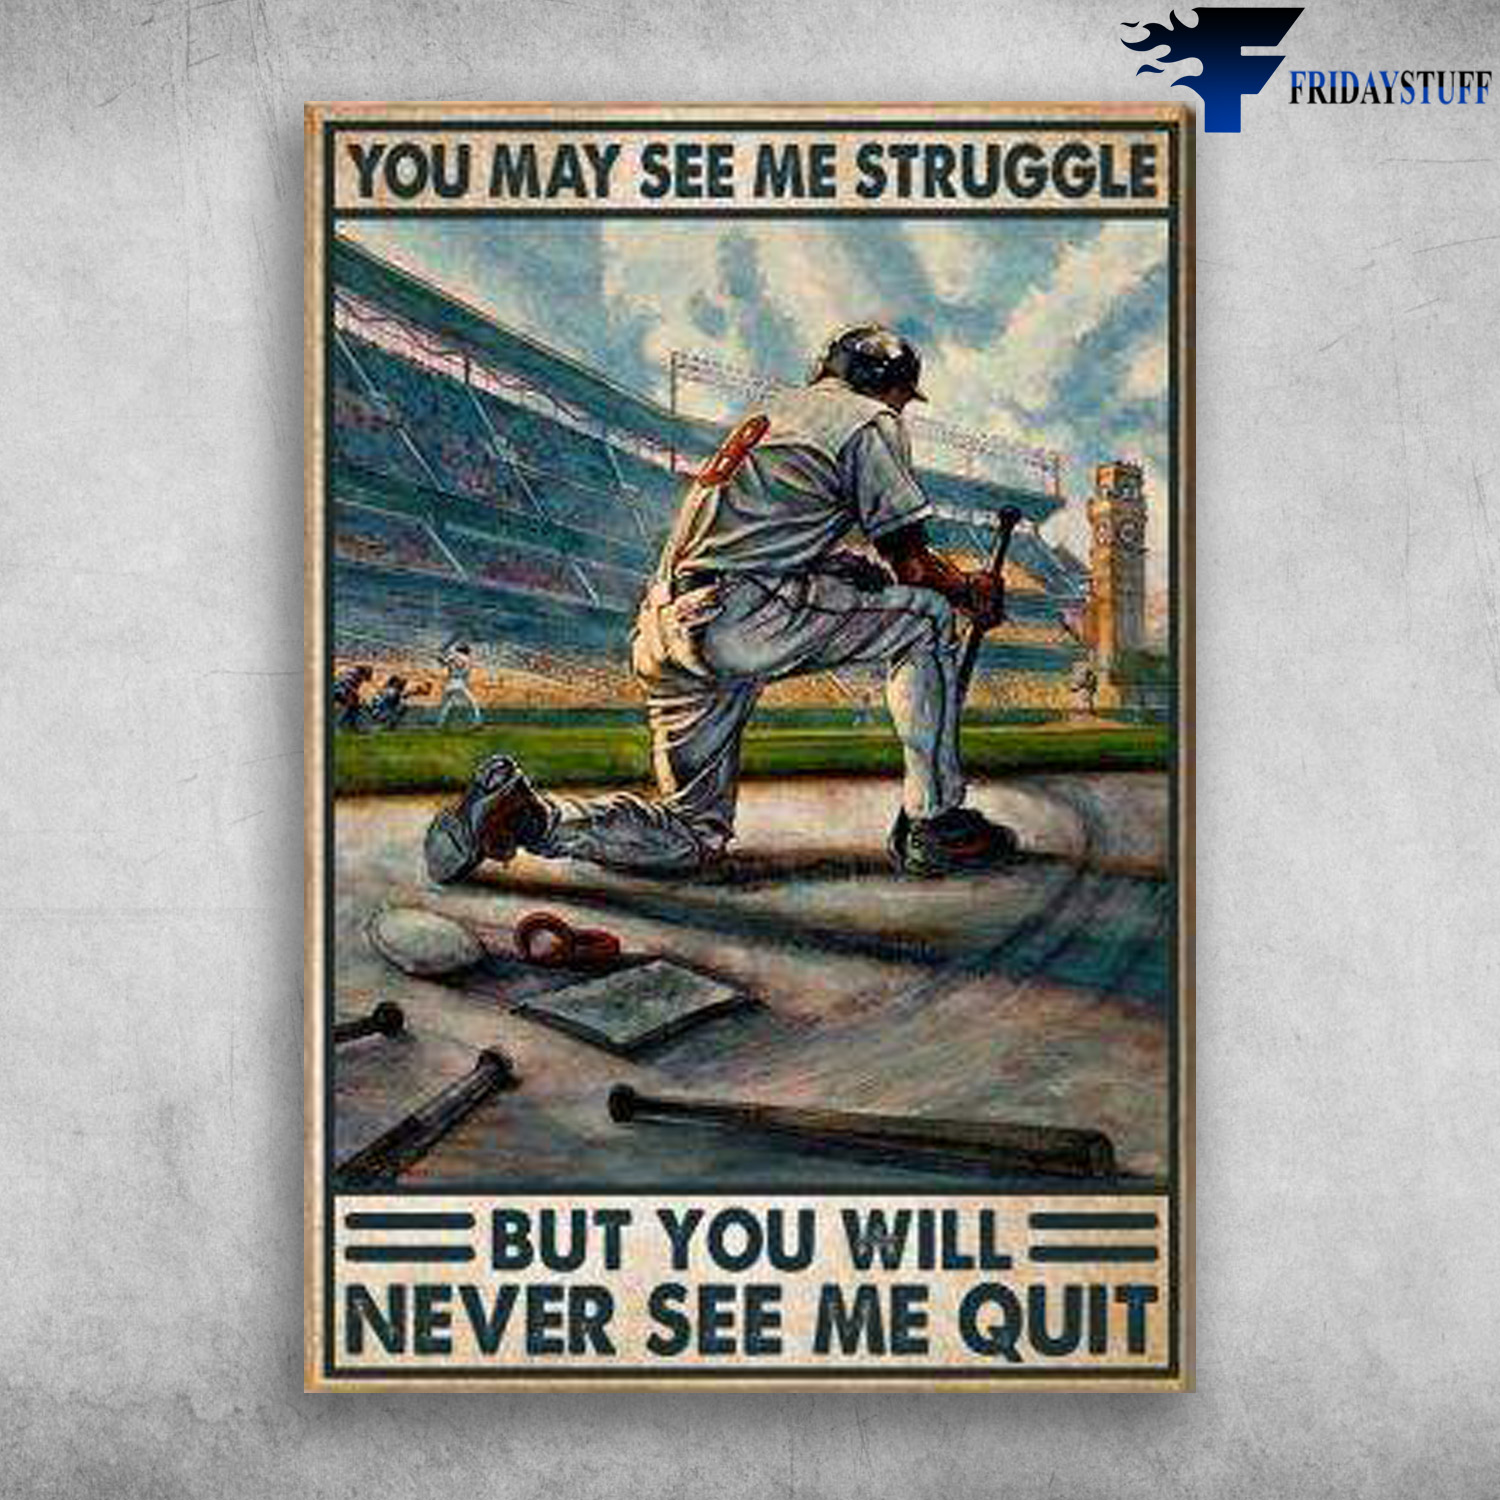 Baseball Player - You May See Me Struggle, But You Will Never See Me Quit